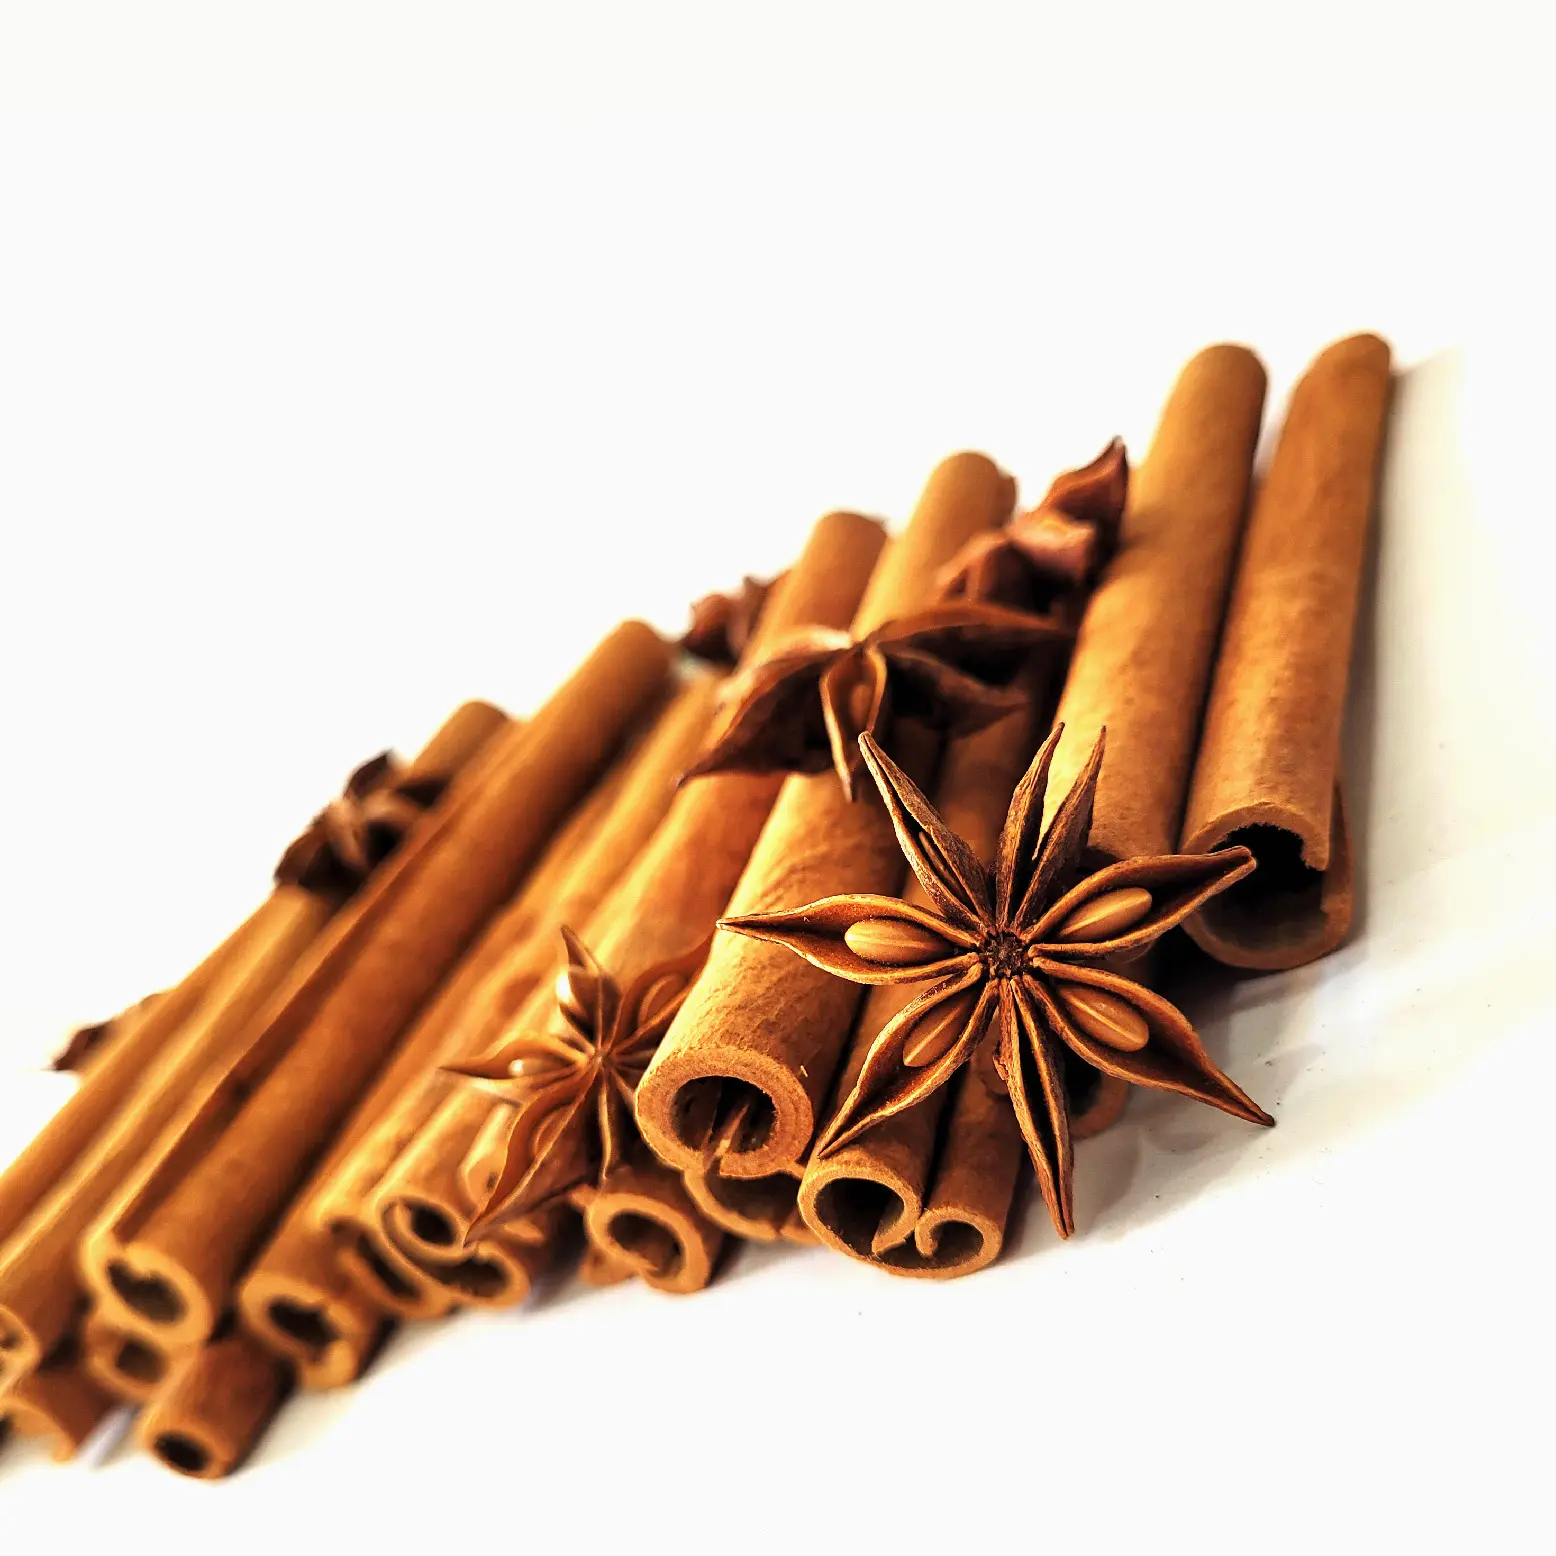 New crop 2023 rolled cassia stick selling in bulk Top product natural cinnamon from Vietnam High quality cinnamon sticks selling